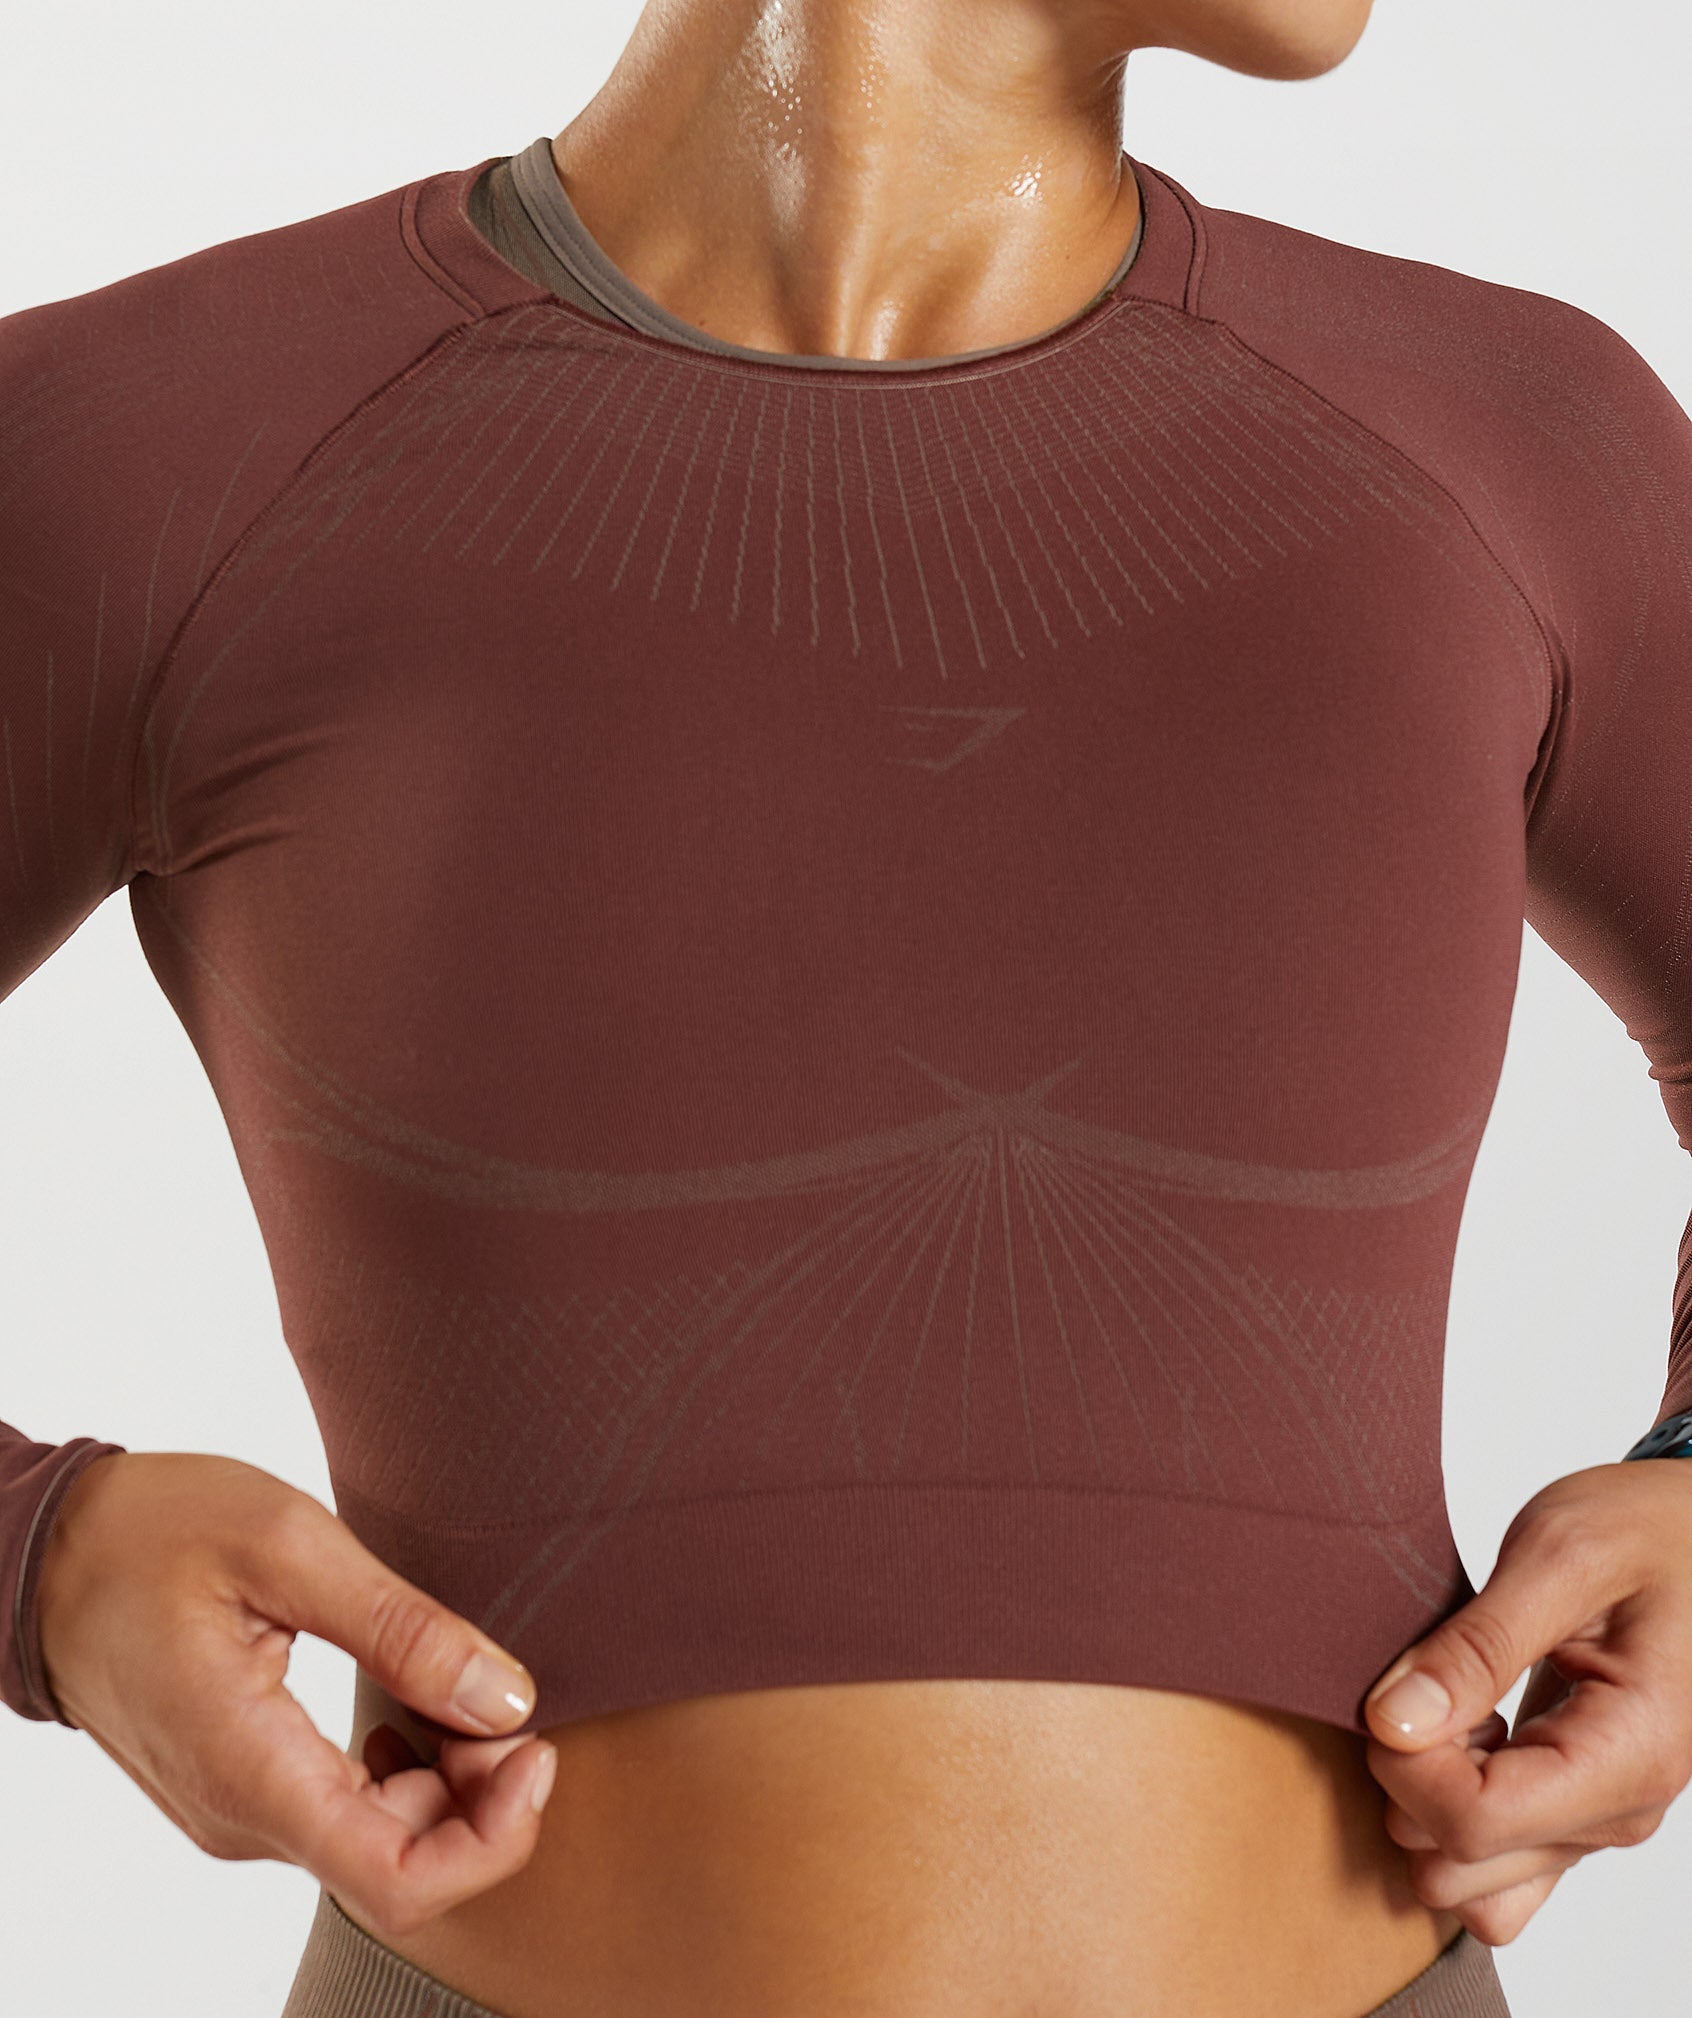 Apex Seamless Crop Top in Cherry Brown/Truffle Brown - view 6